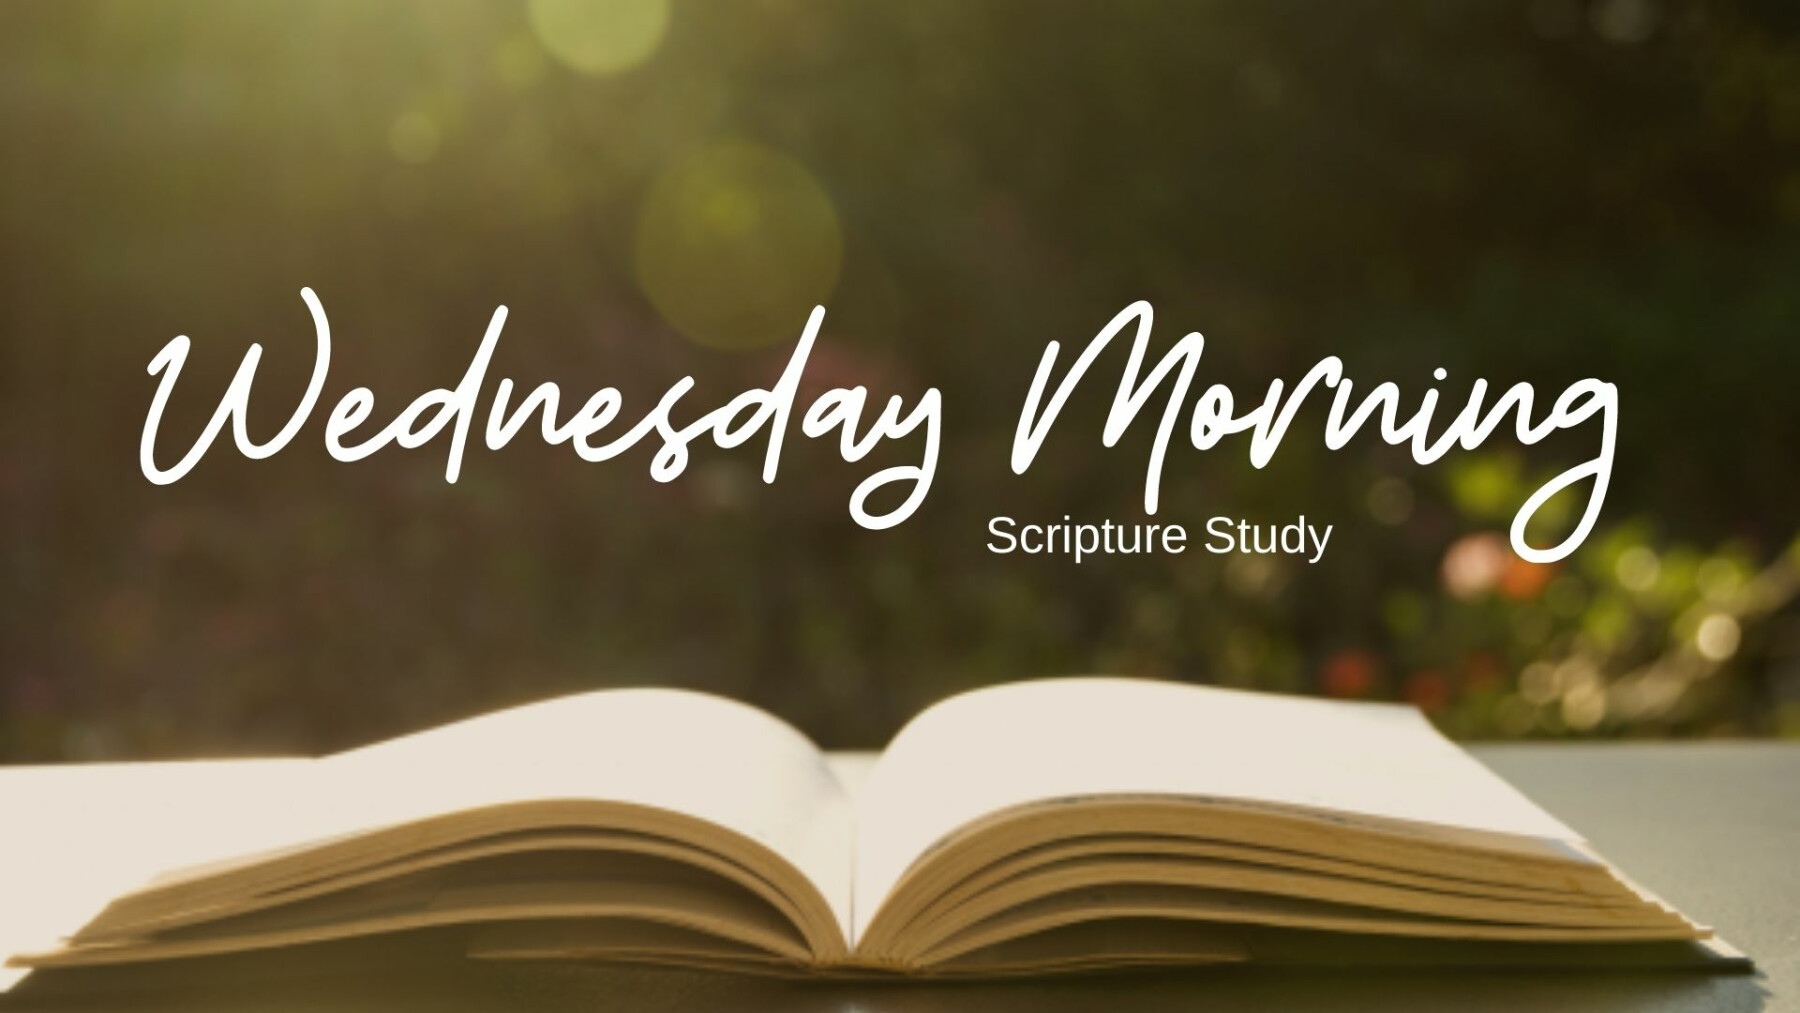 Wednesday Morning Scripture Study